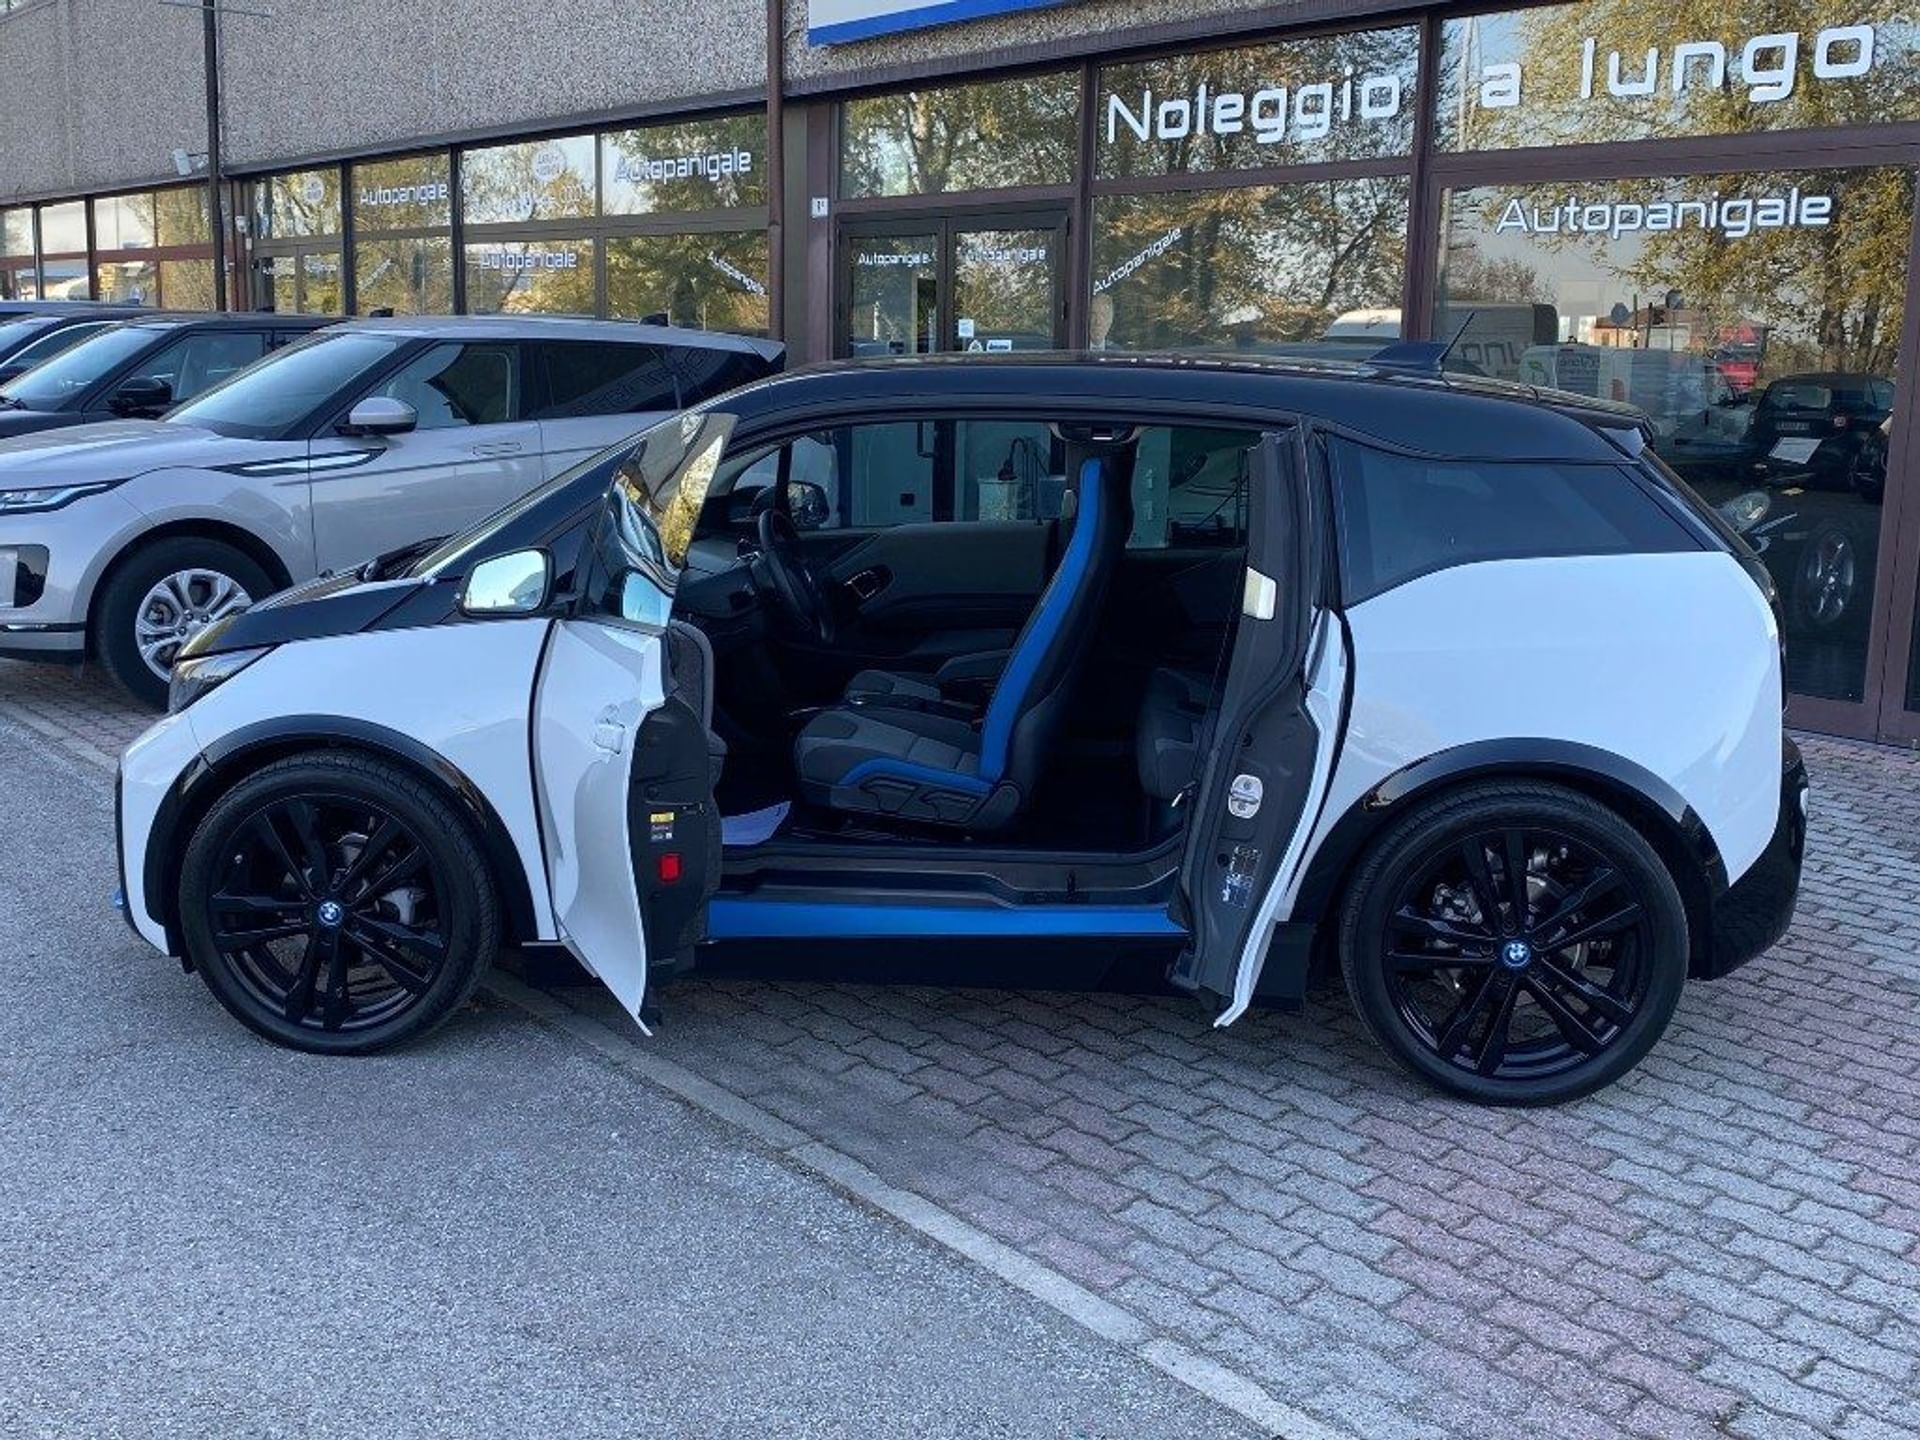 Bmw i3s - Laterale sinistro